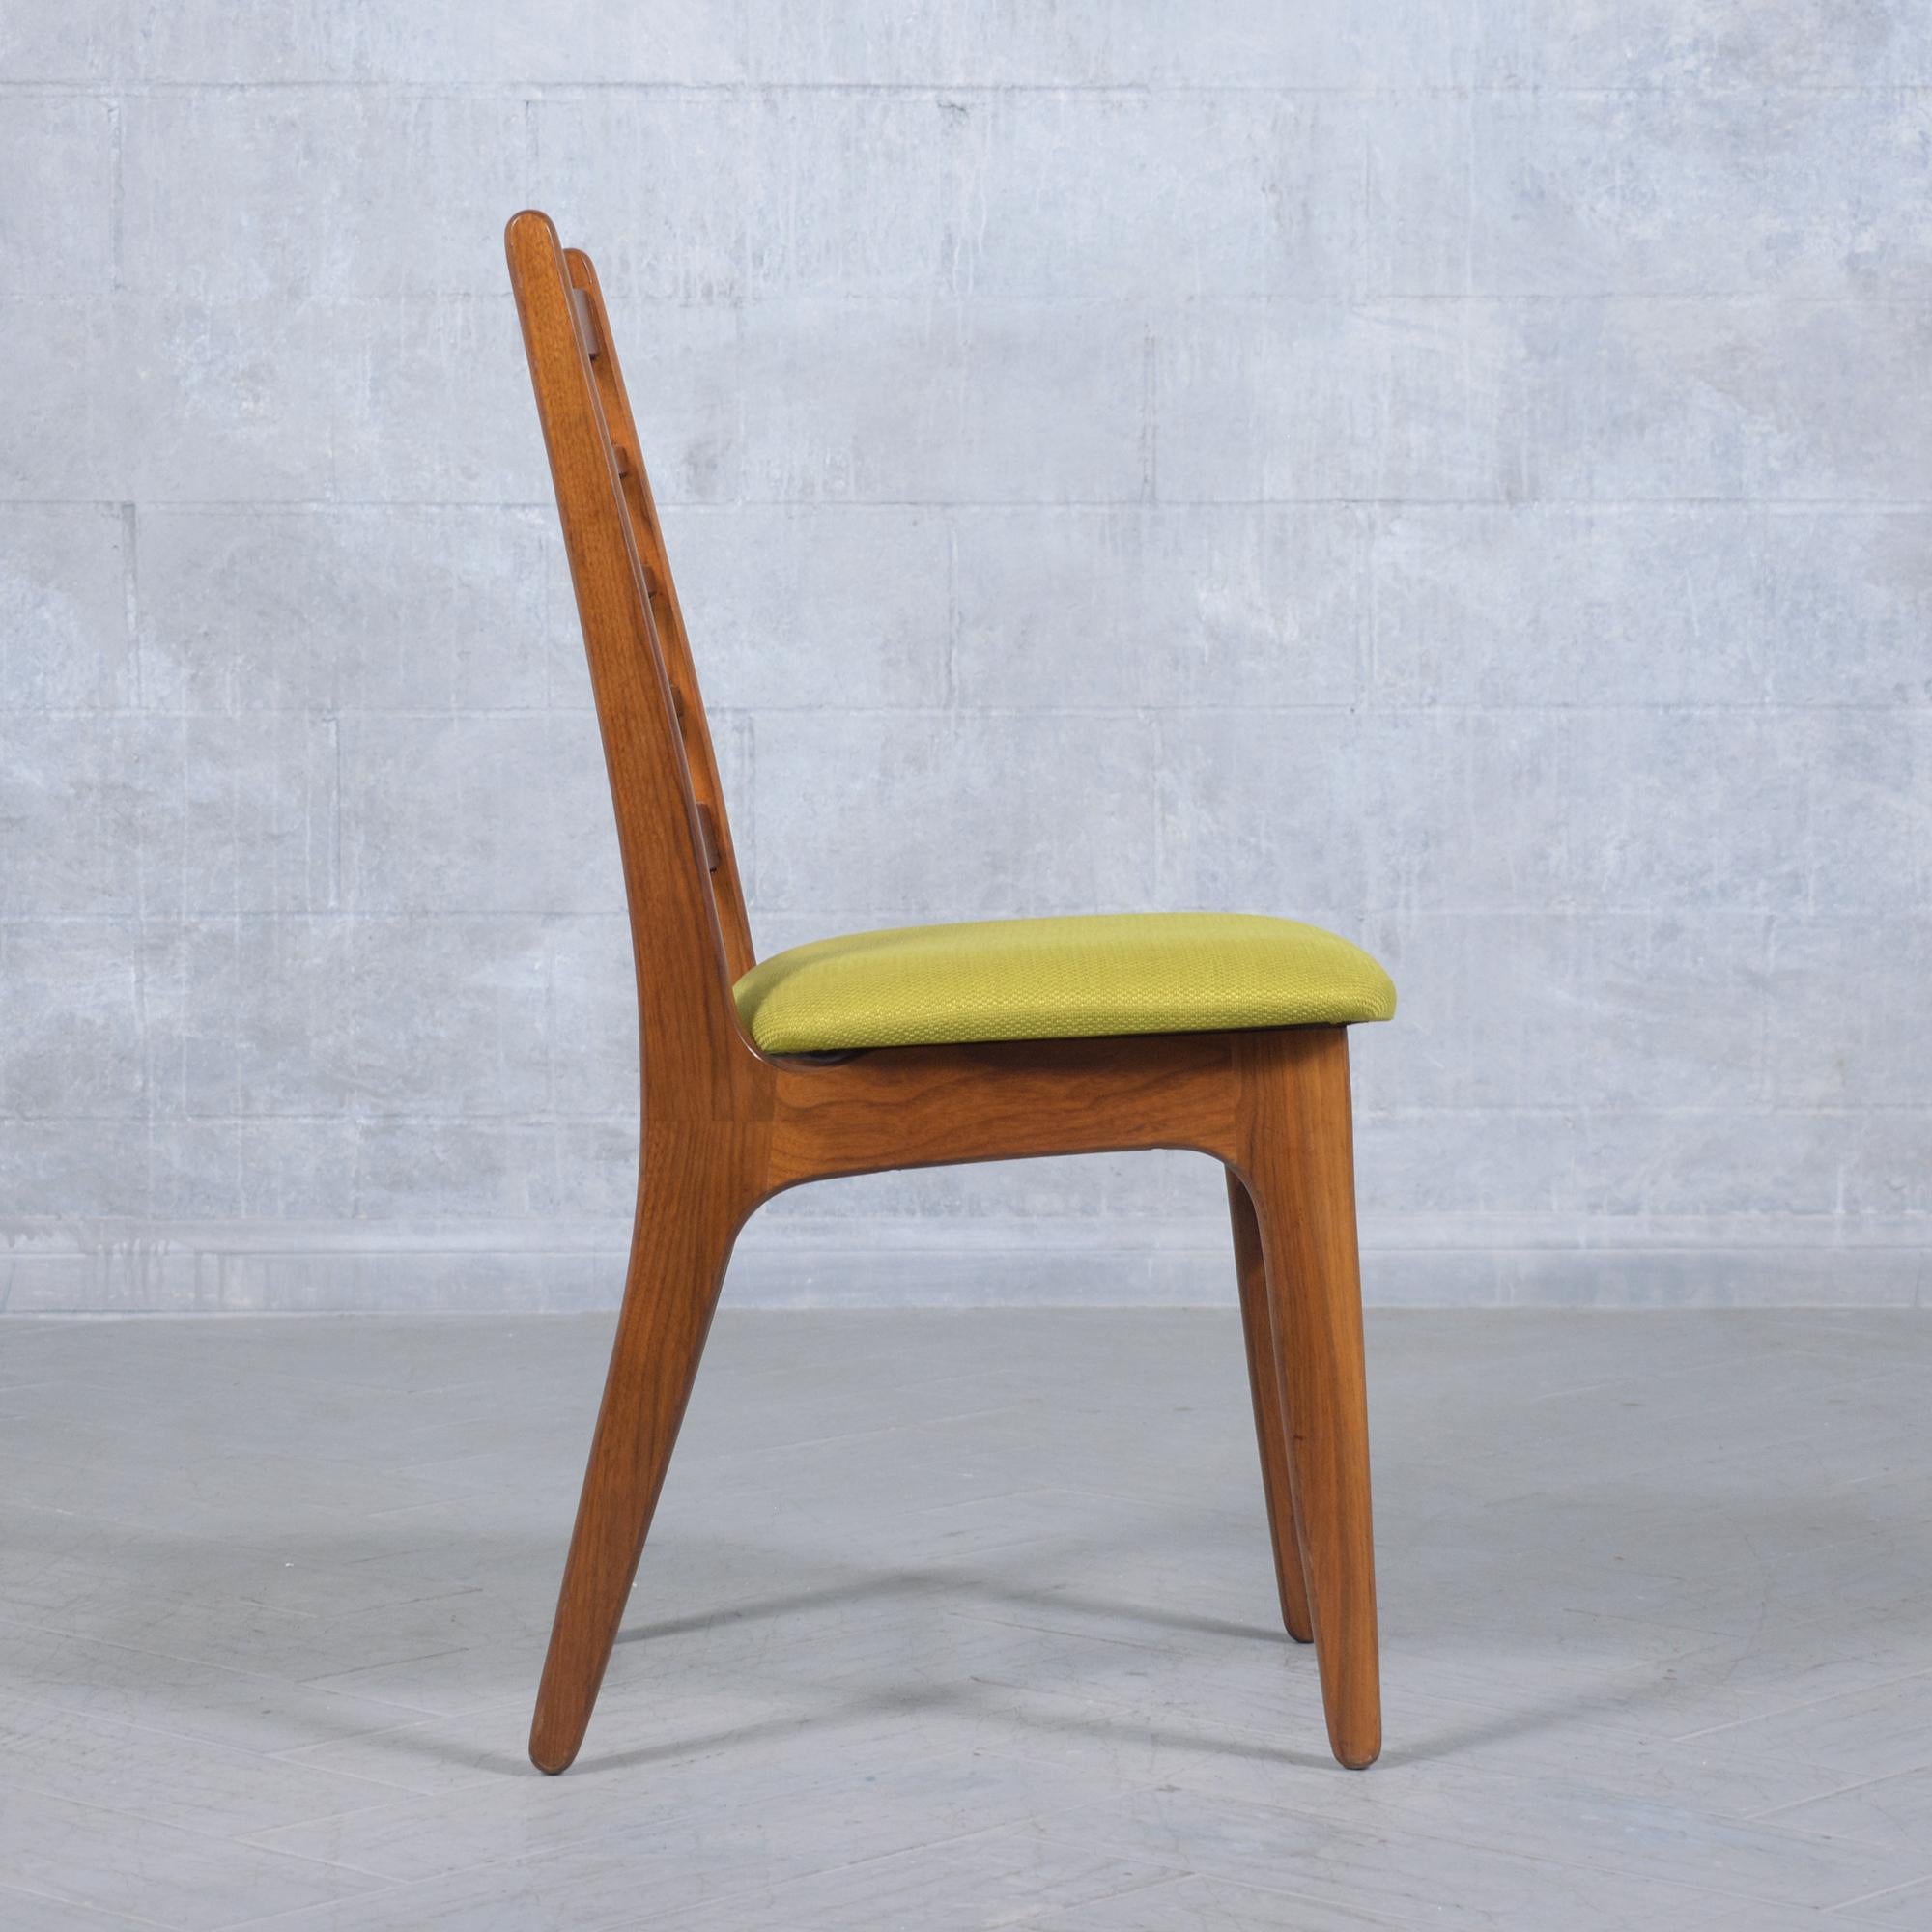 Mid-20th Century 1960s Danish Modern Teak Chair in Walnut Finish with Green Fabric Upholstery For Sale